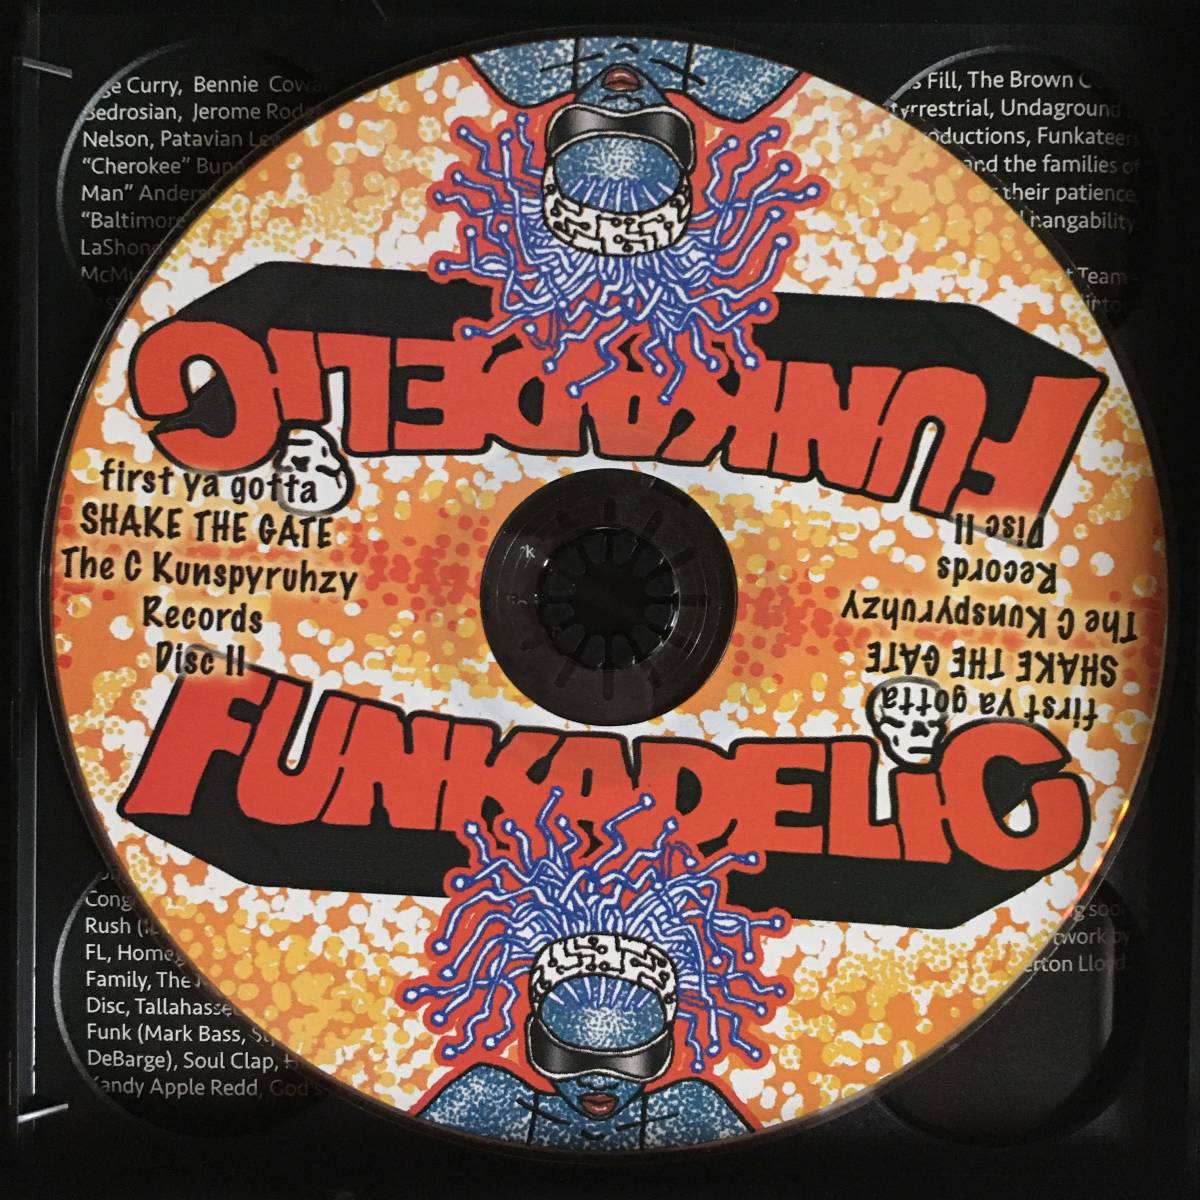 3CD ◎ FUNKADELIC ファンカデリック ◎ FIRST YOU GOTTA SHAKE THE GATE　SLY STONE　Pファンク_画像4